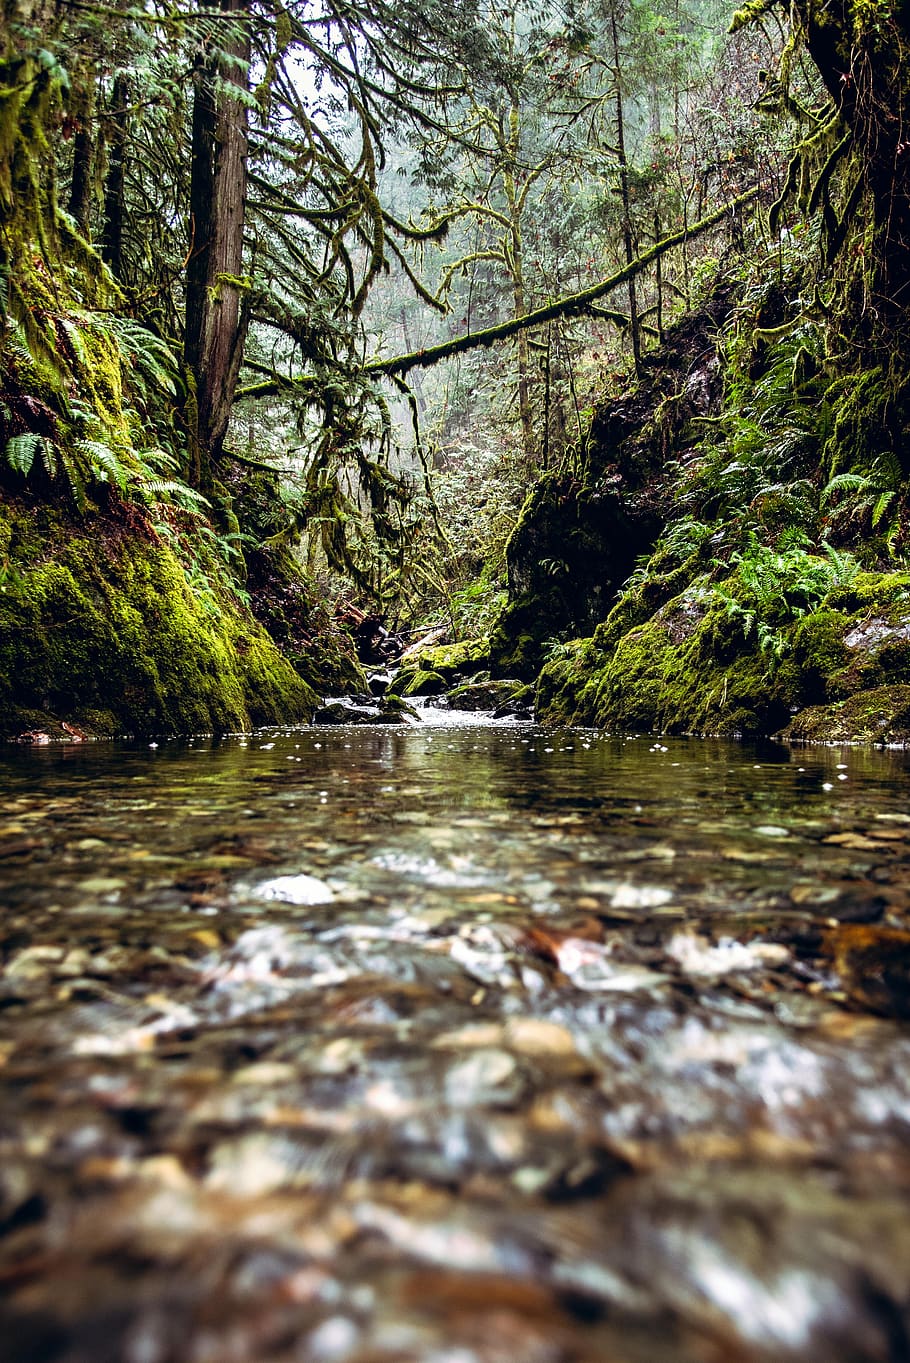 stream, forest, rain forest, nature, scenic, green, scenery, tree, environment, flowing